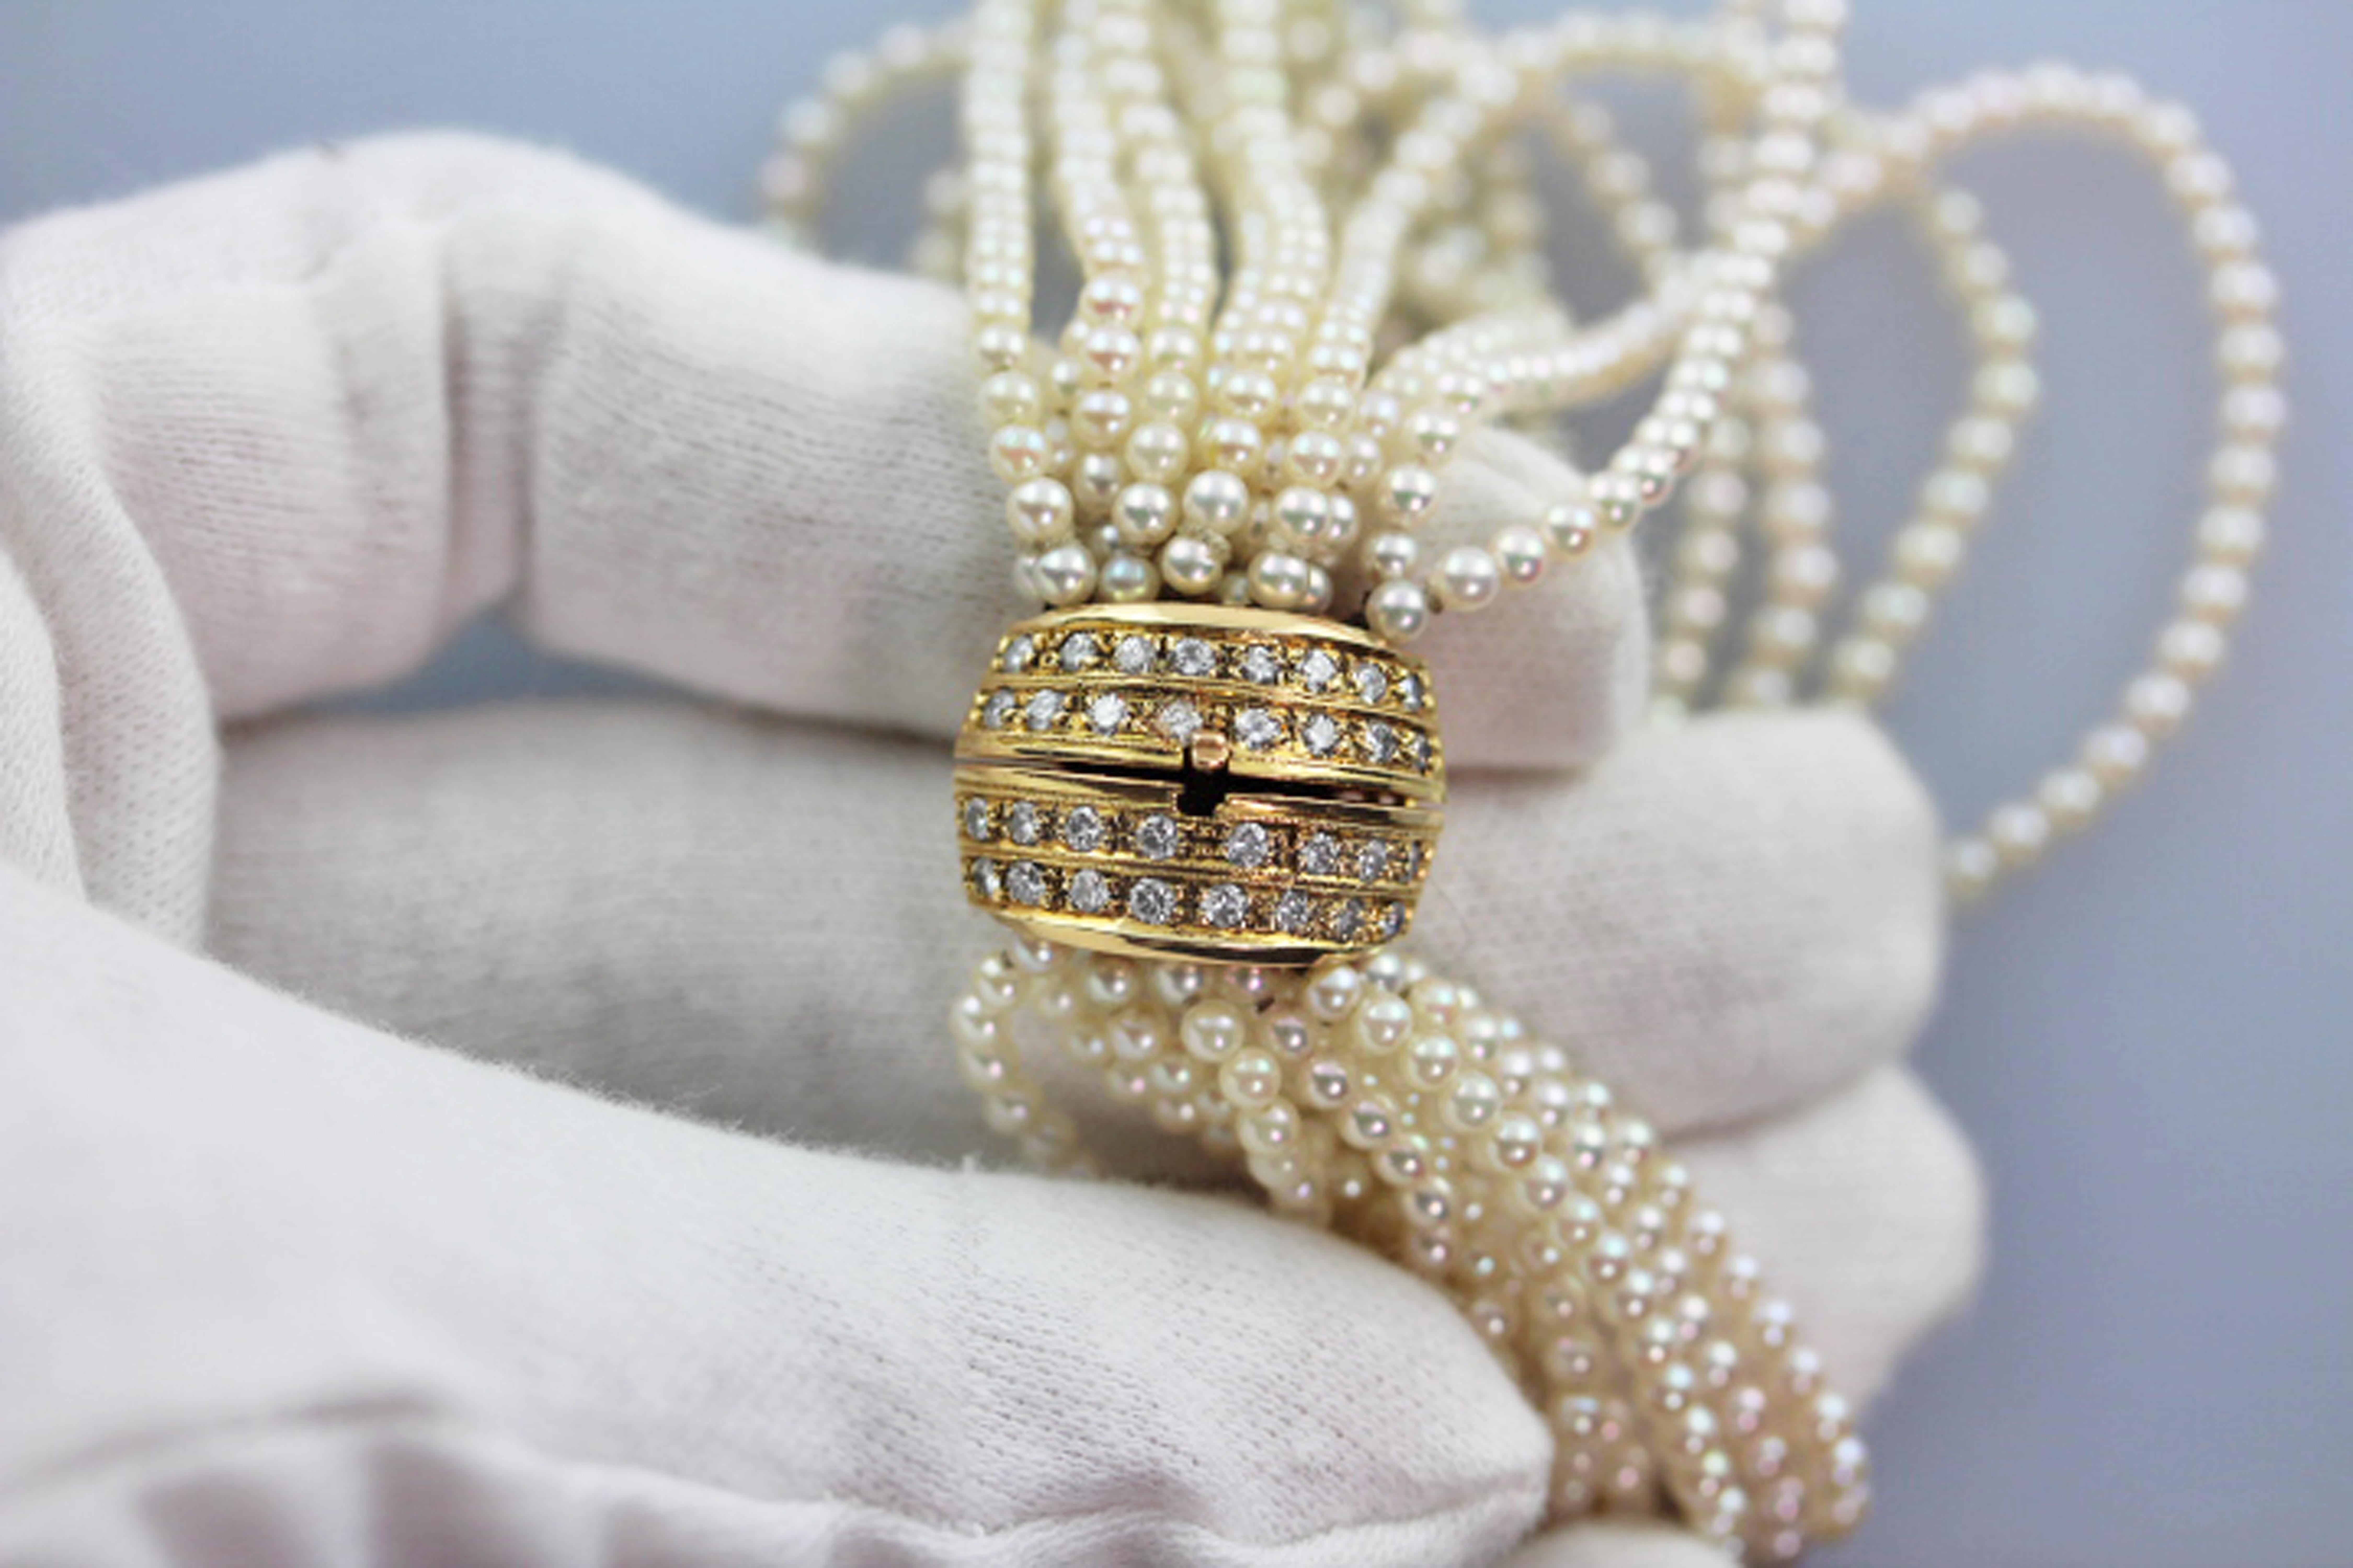 This breathtaking vintage bracelet features 11 strands of beautiful round cultured pearls with a large clasp crafted from solid 18kt yellow gold. 
The lovely pearls are well matched in size, at approximately 3 mm each, and have a gorgeous white